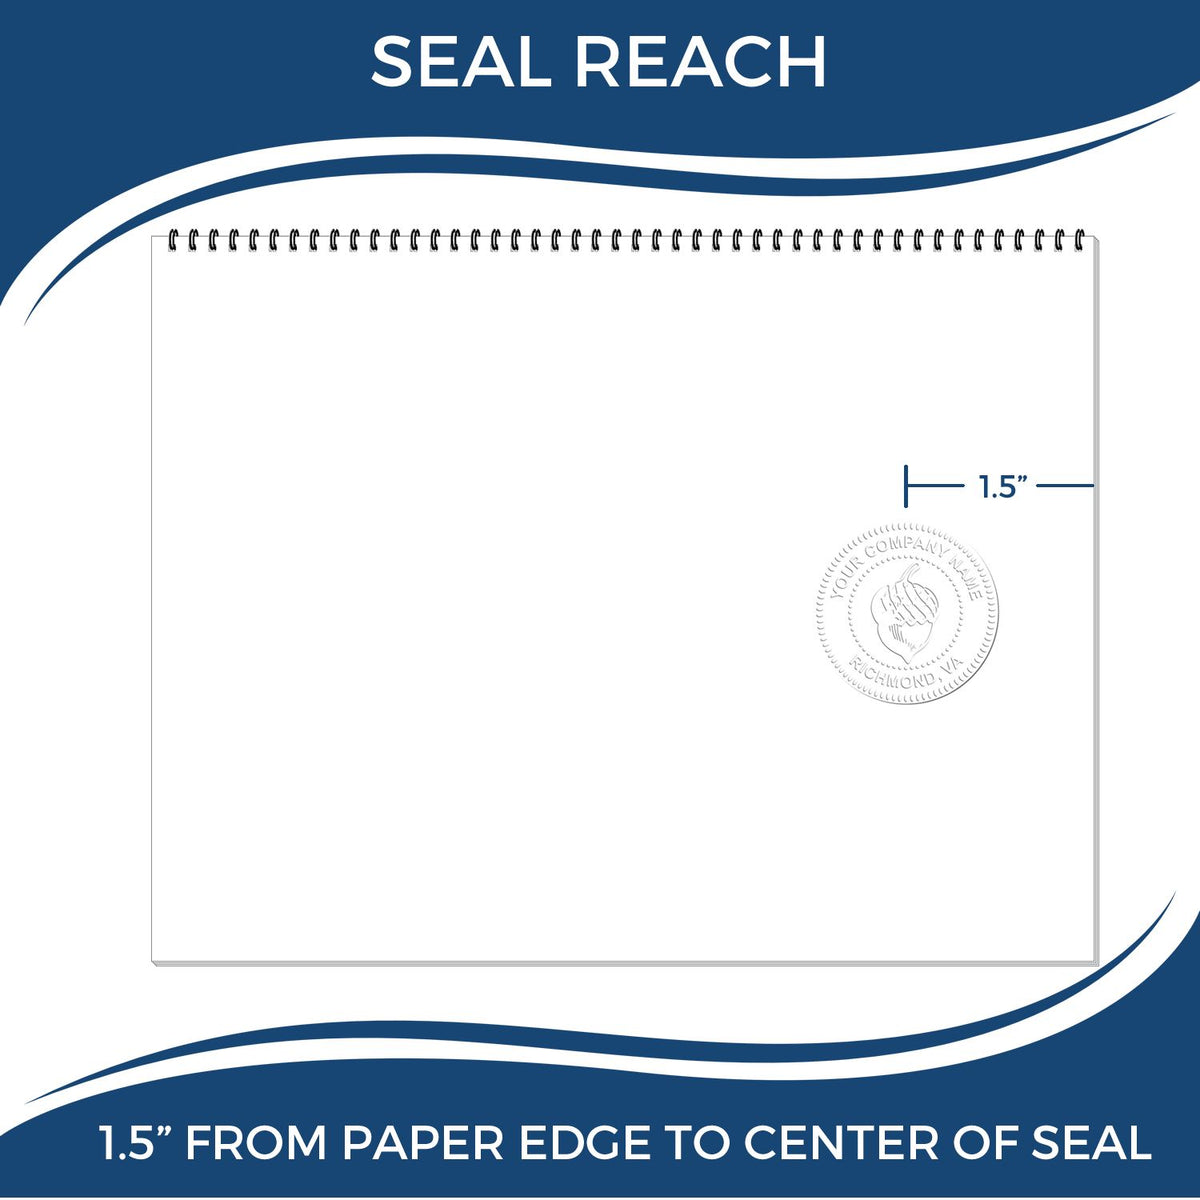 An infographic showing the seal reach which is represented by a ruler and a miniature seal image of the Handheld Wyoming Architect Seal Embosser